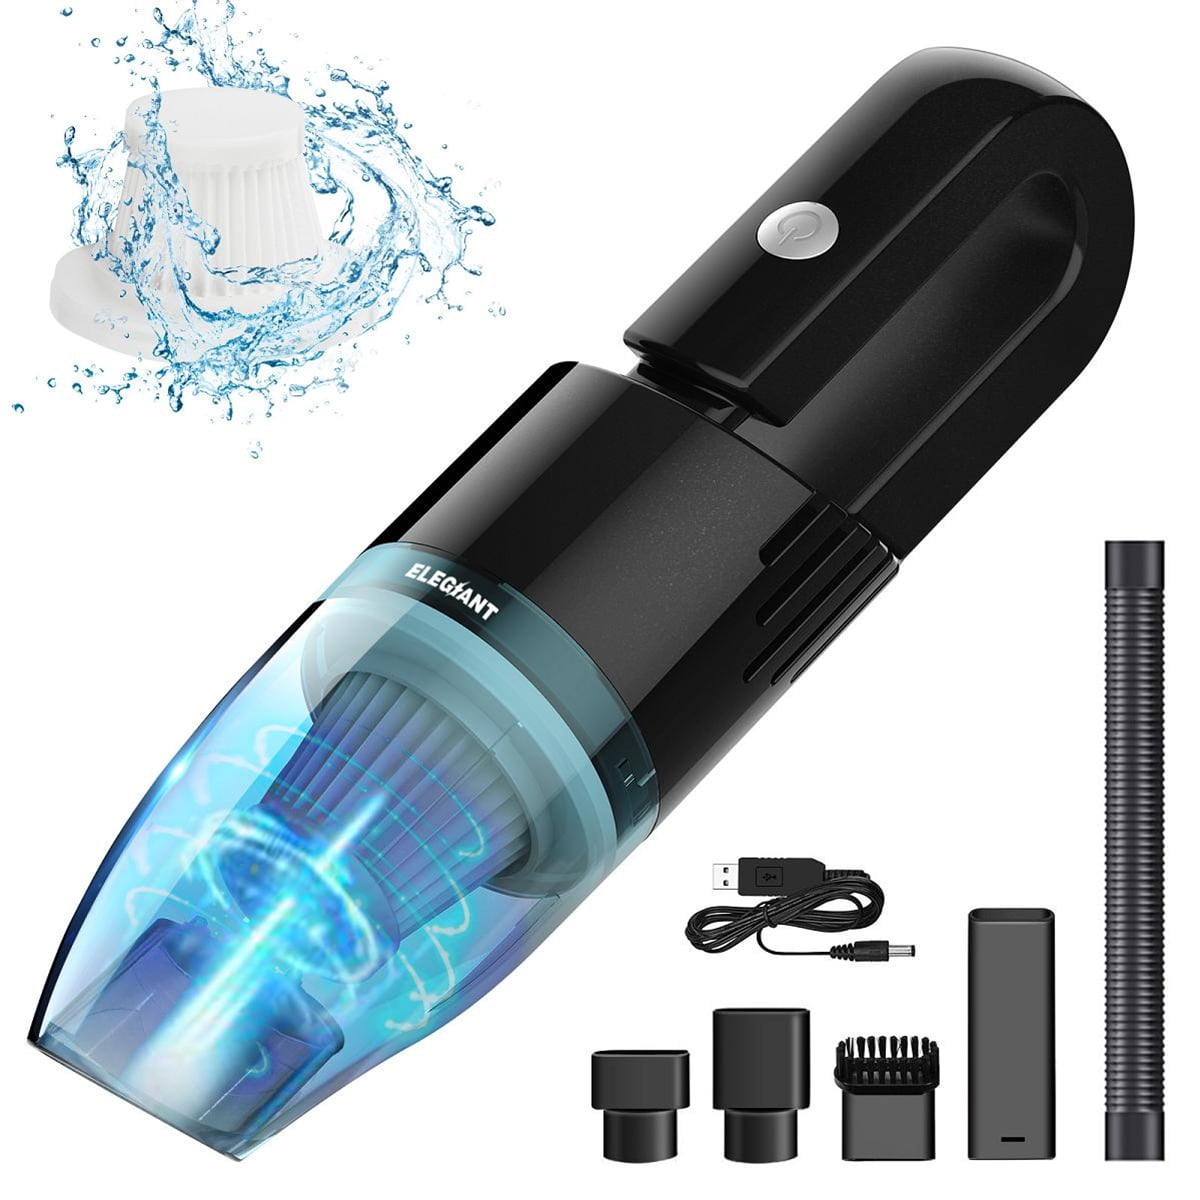 USB Vacuum Cleaner - 24h delivery